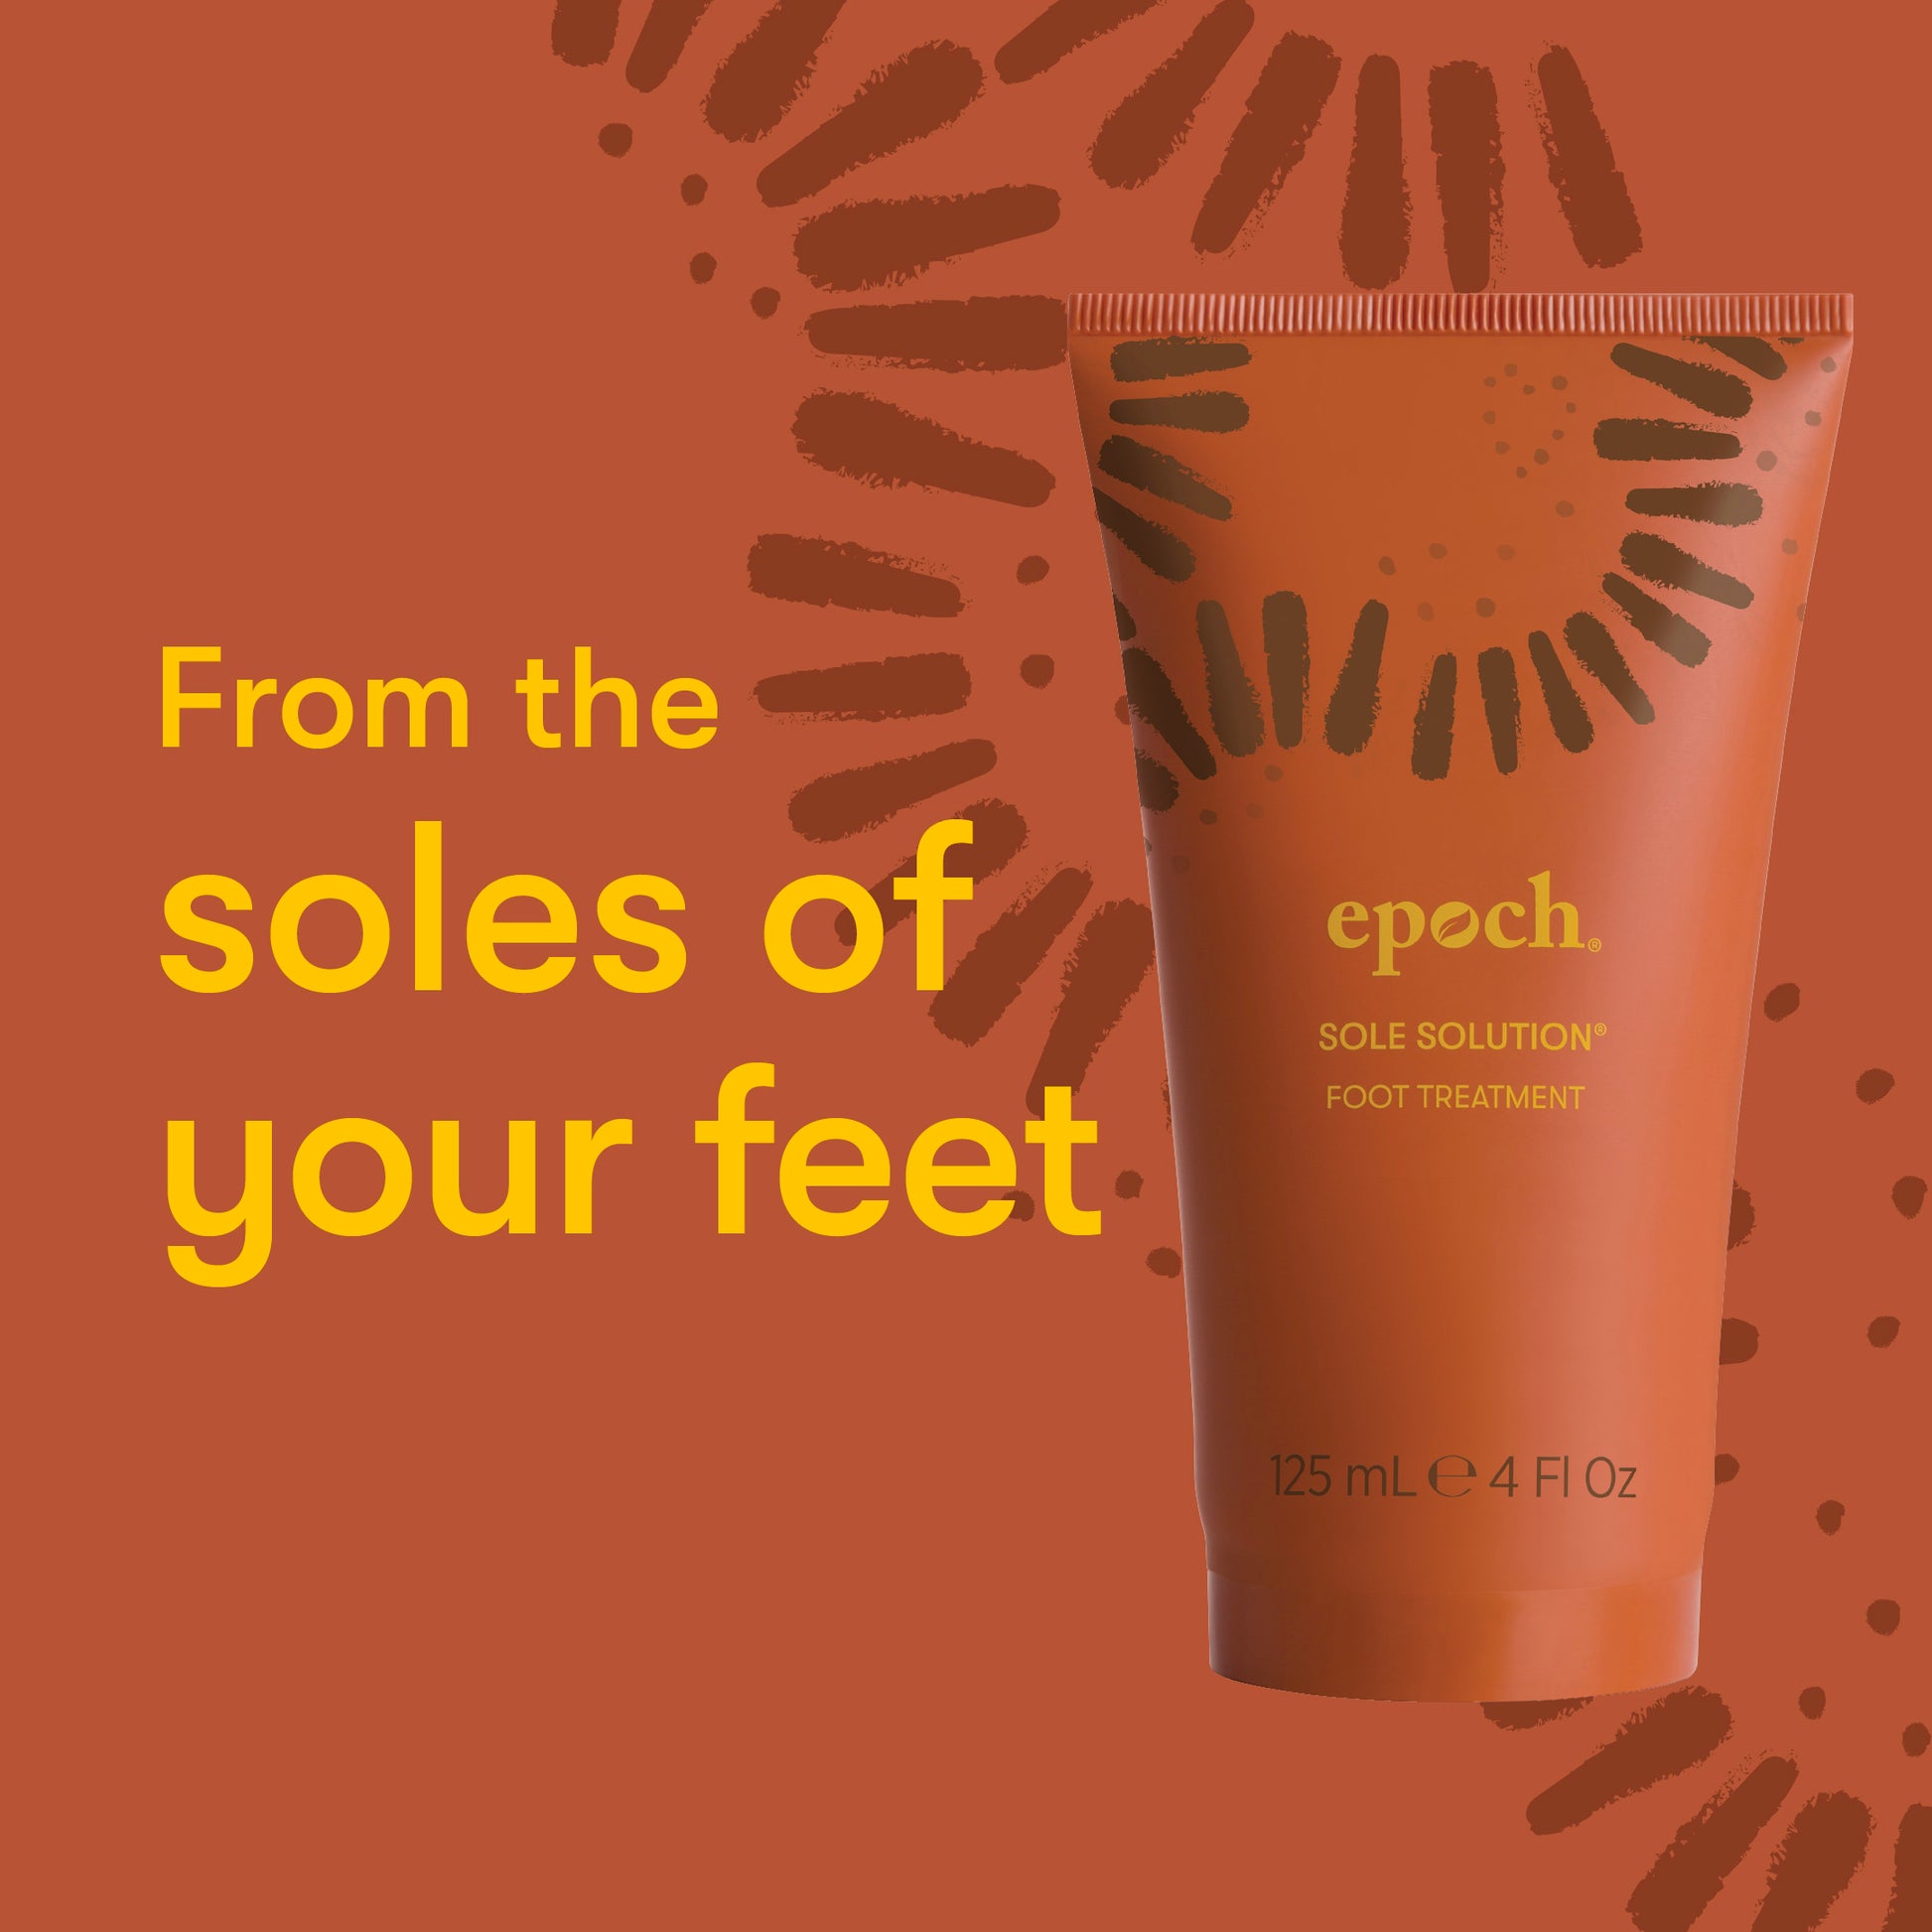 Epoch® Sole Solution® Foot TreatmentBuy Epoch® Sole Solution® Foot Treatment
* Discount will apply at checkout. 
Embrace smooth, soft feet all the way down to your soles. Harnessing the natural benefitEpoch® Sole Solution® Foot Treatment